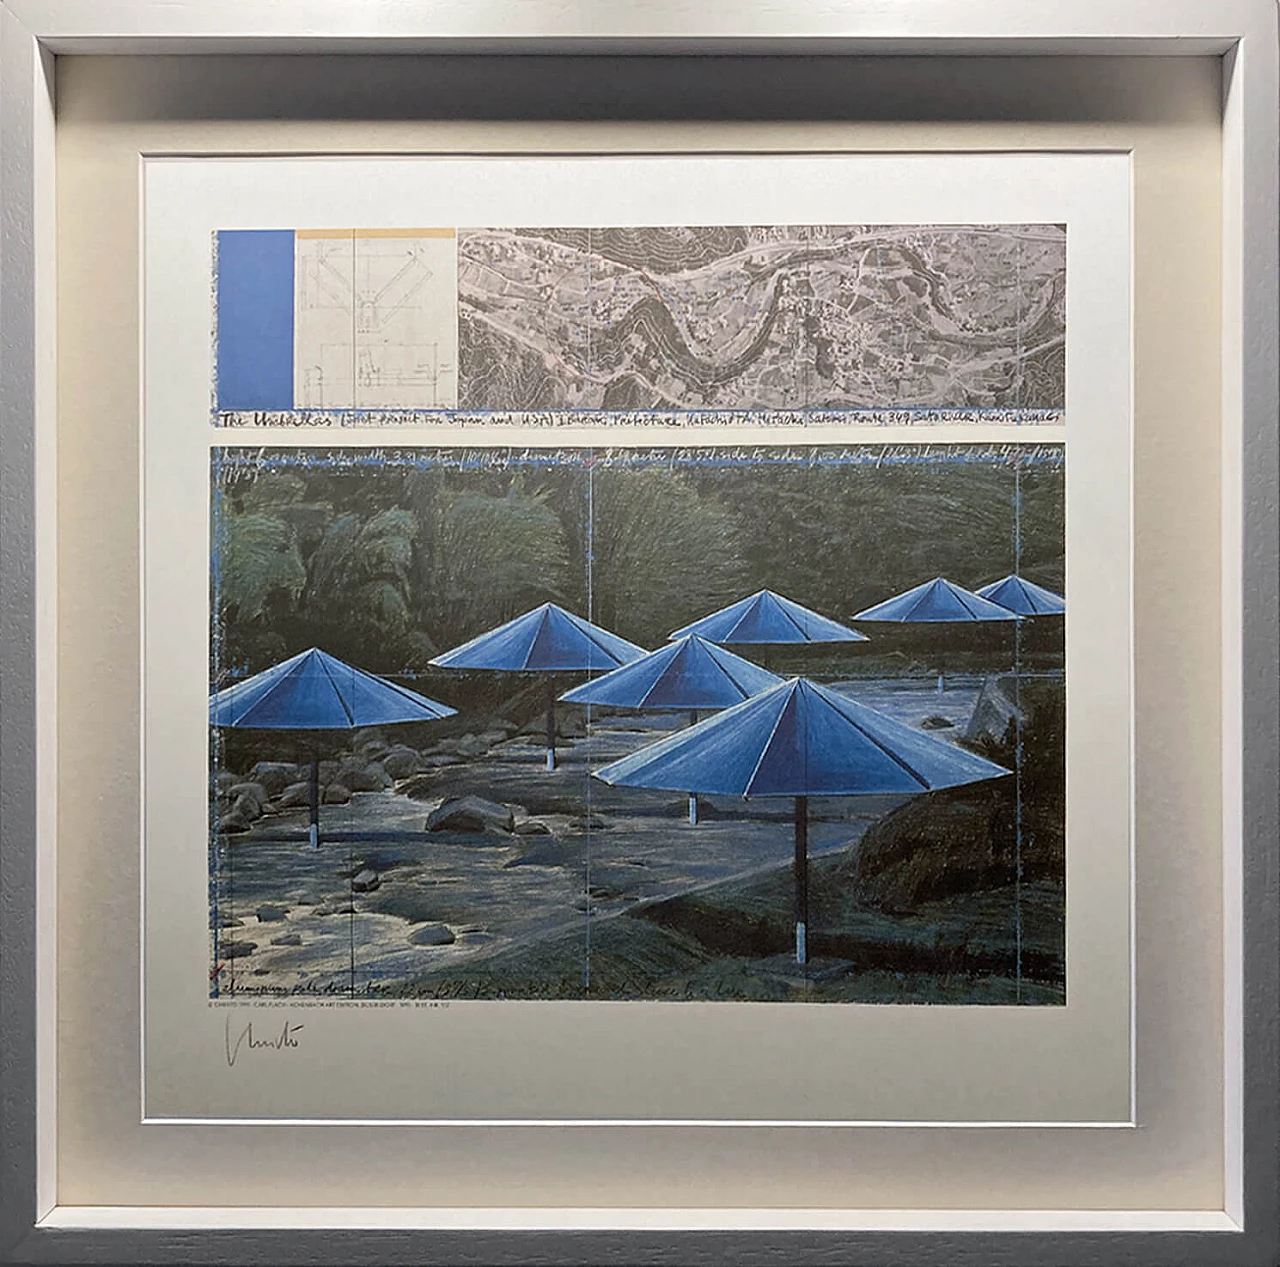 Christo, The Umbrellas - Joint Project for Japan and USA, lithograph, 1991 25